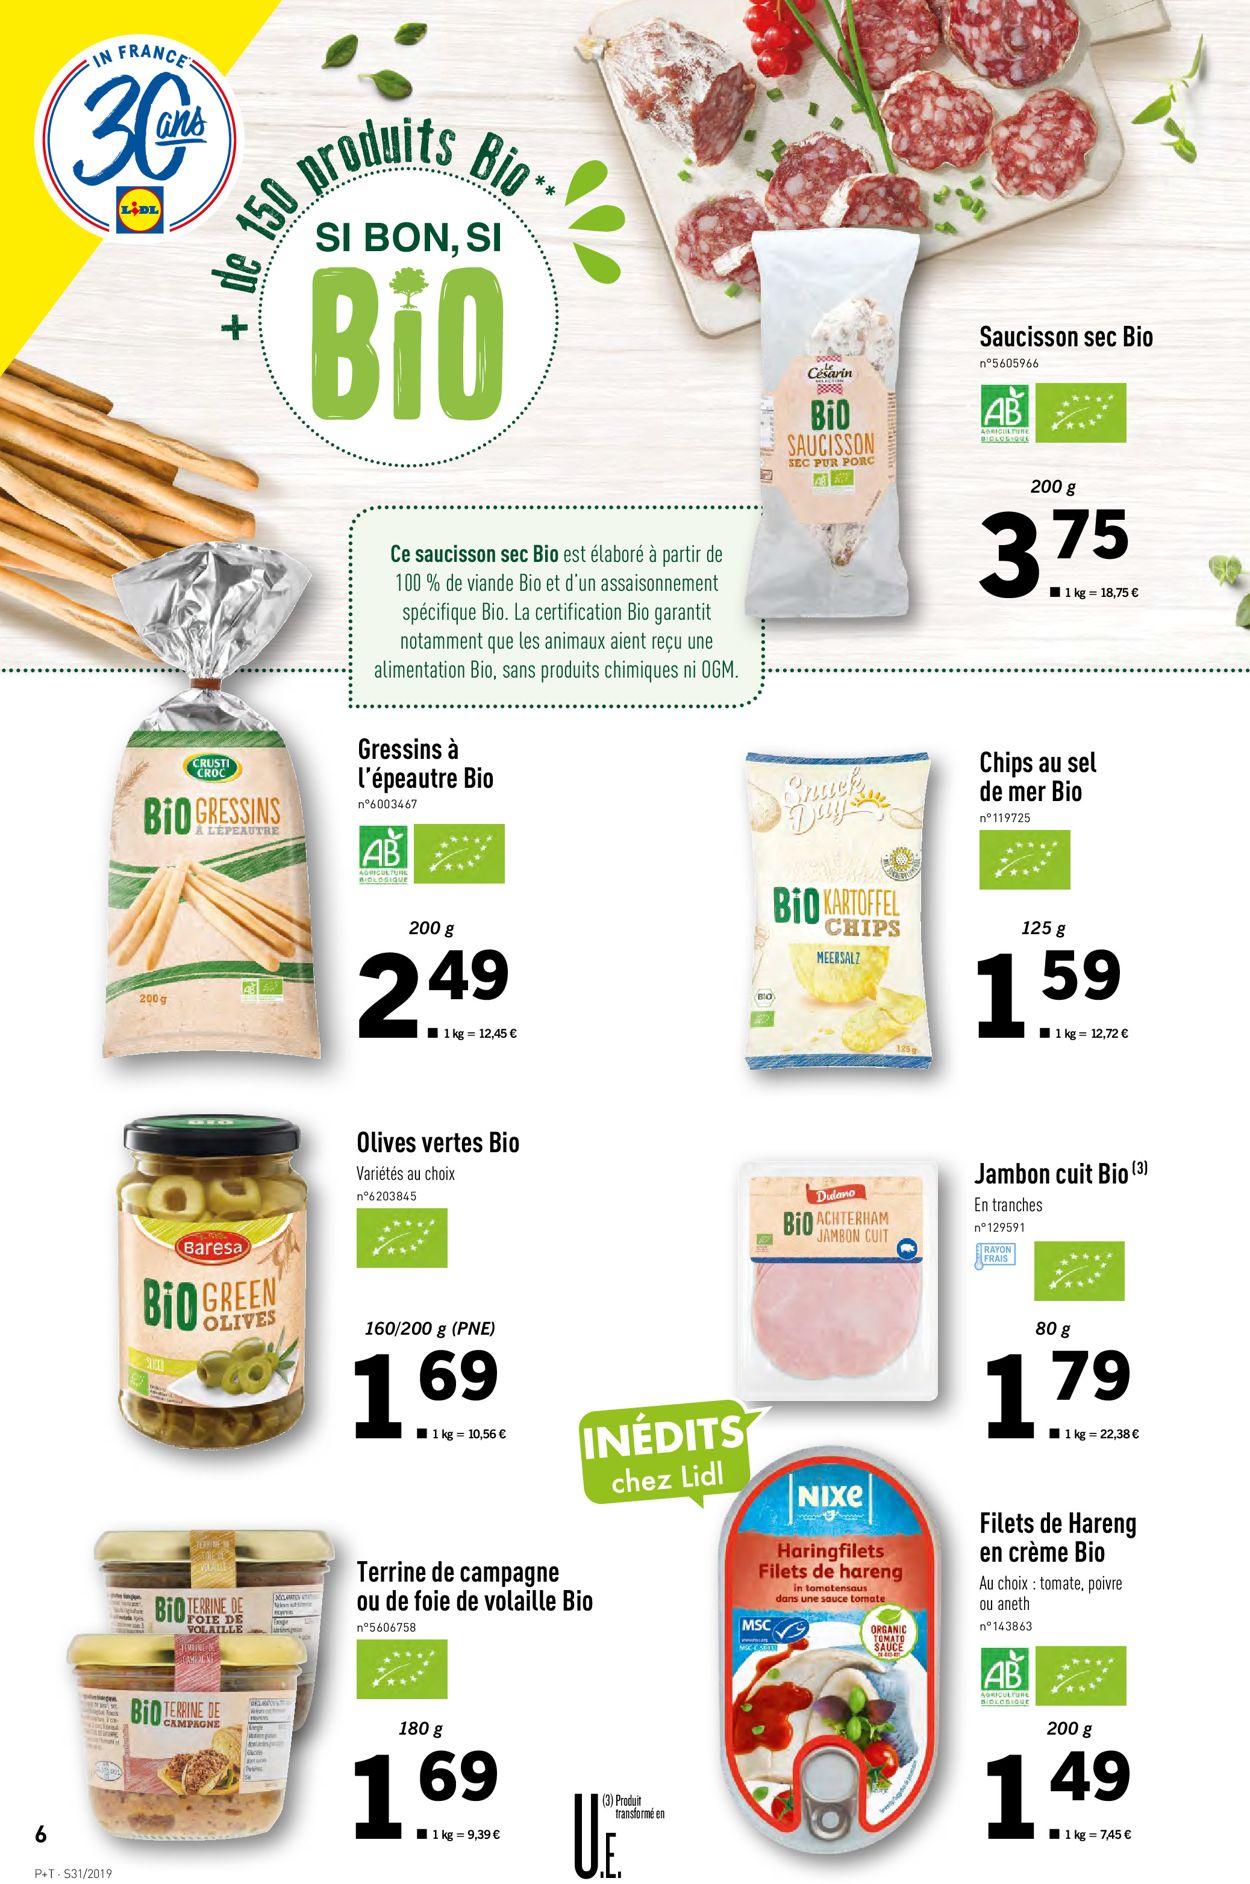 Lidl Catalogue - 31.07-06.08.2019 (Page 6)